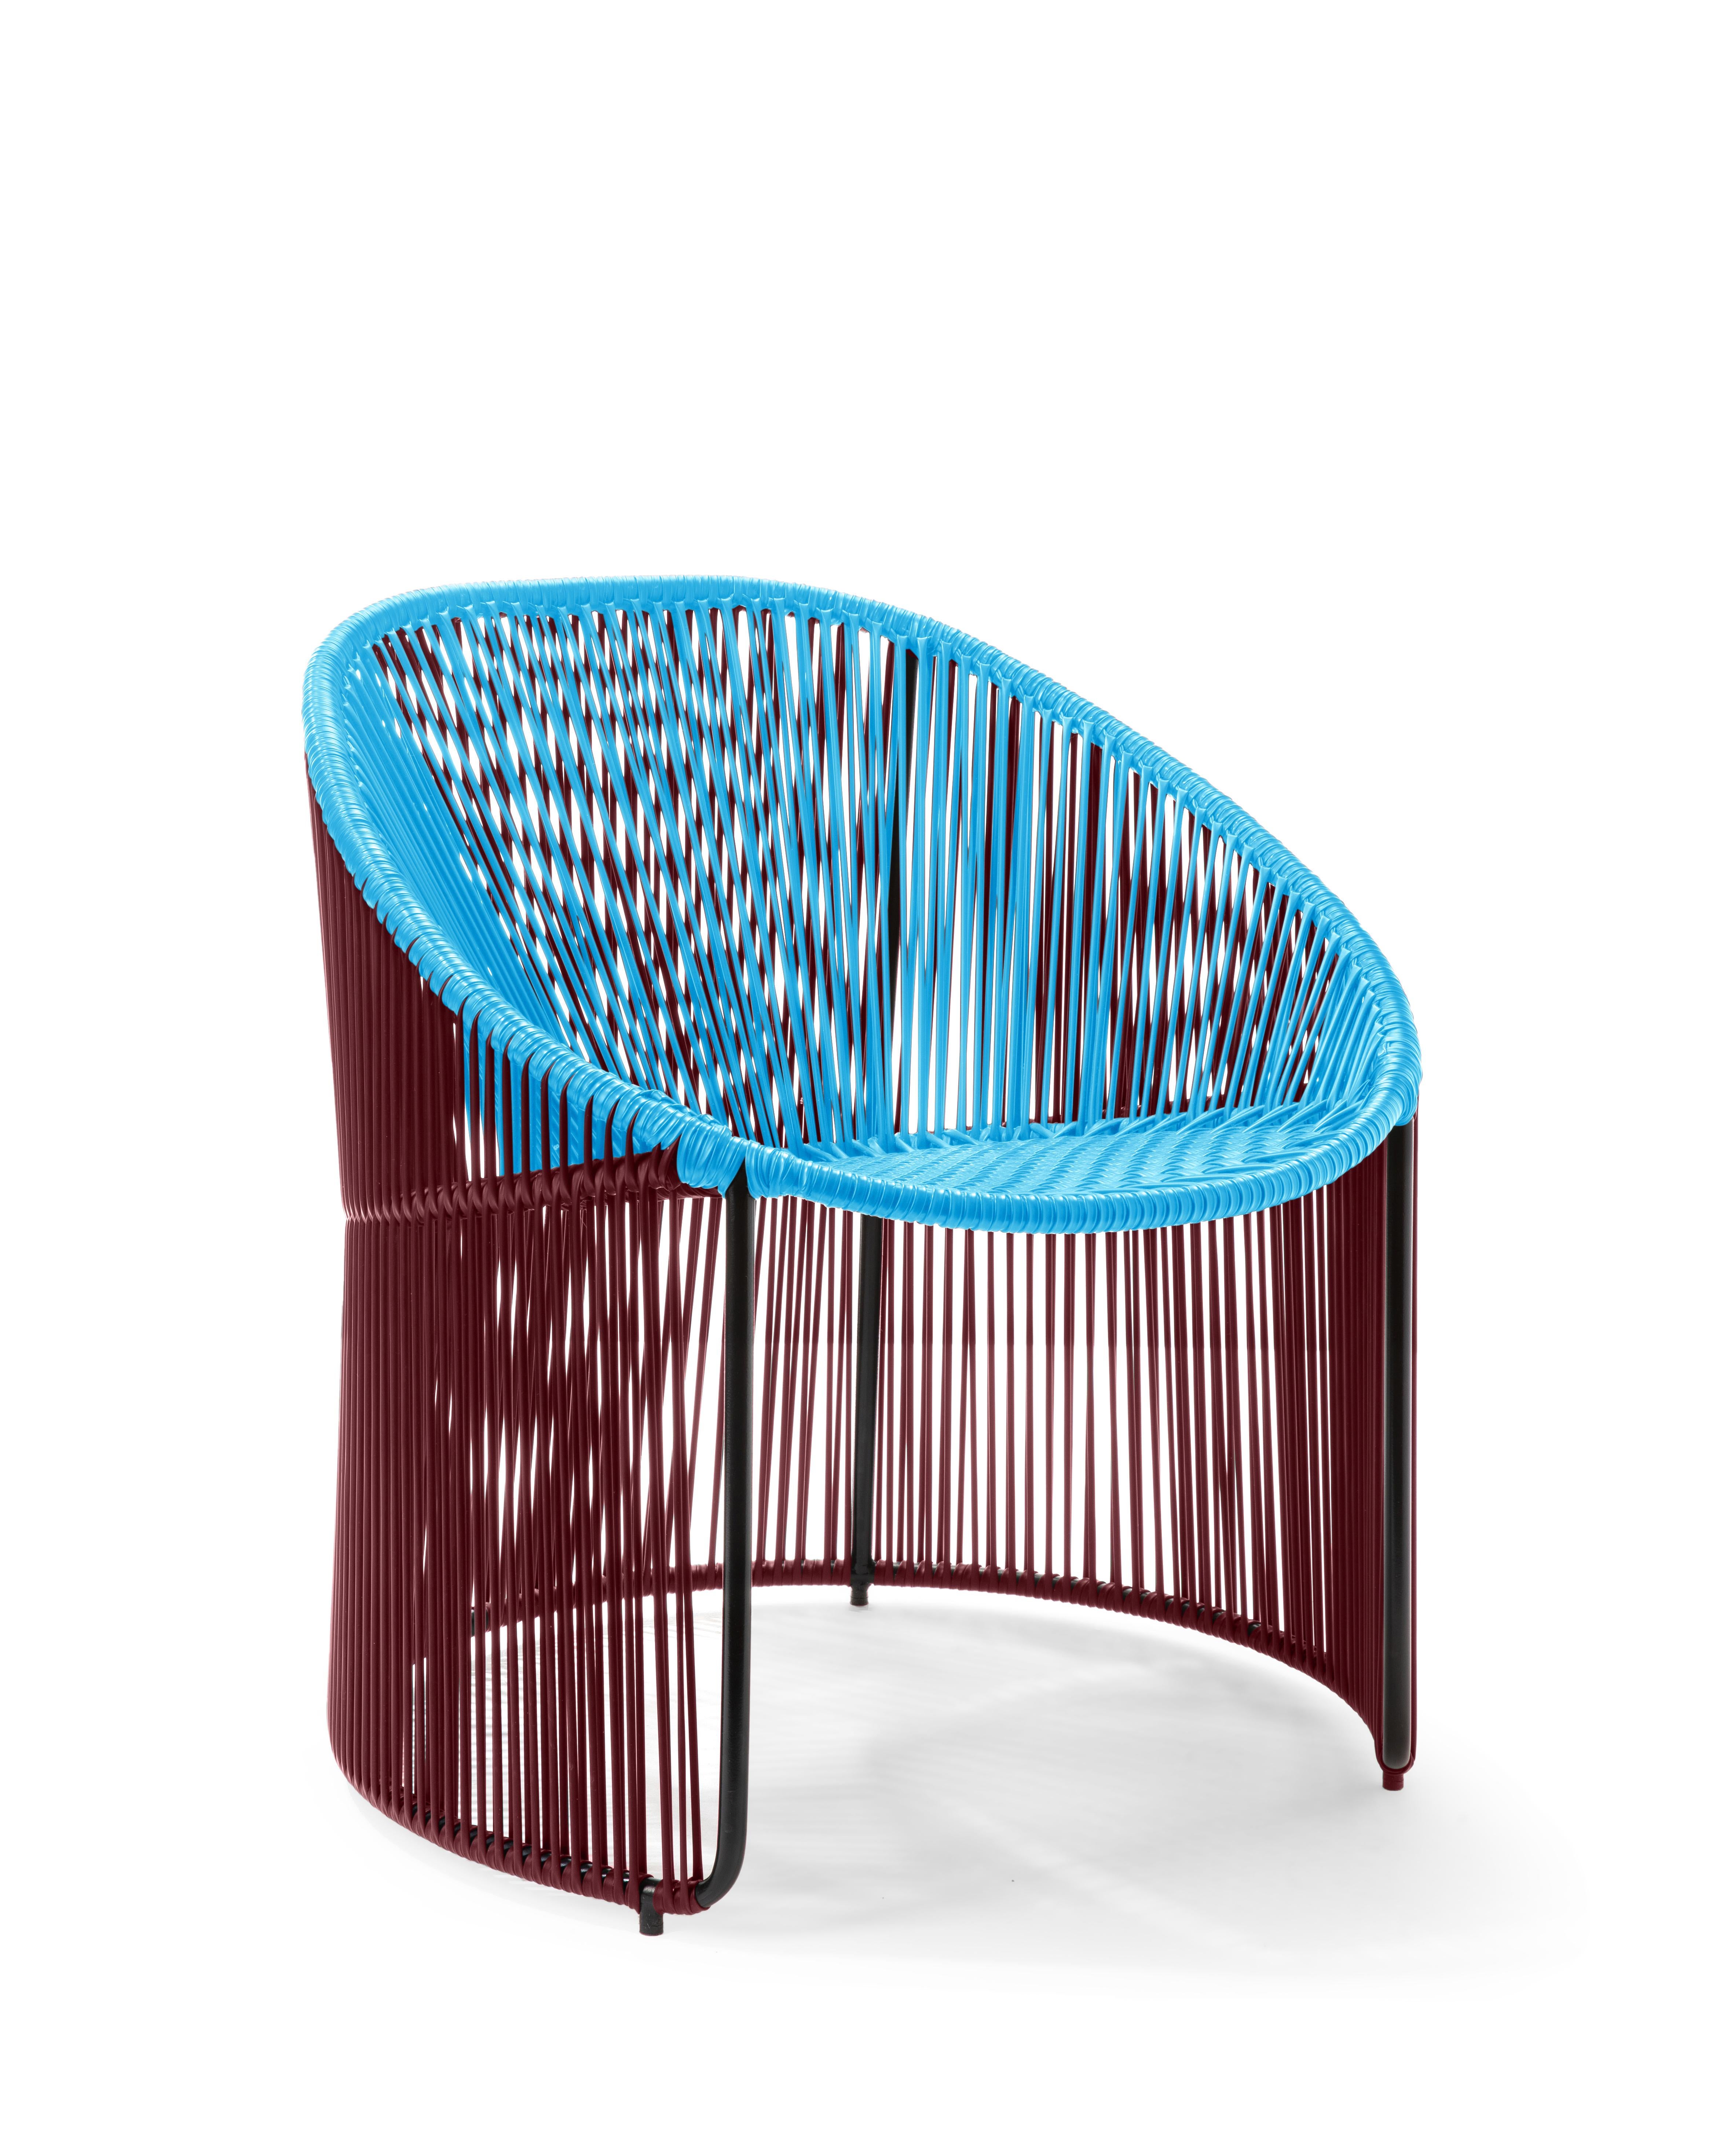 Blue Cartagenas lounge chair by Sebastian Herkner.
Materials: PVC strings. Galvanized and powder-coated tubular steel frame.
Technique: made from recycled plastic. Weaved by local craftspeople in Colombia. 
Dimensions: W 64 x D 70 x H 74 cm